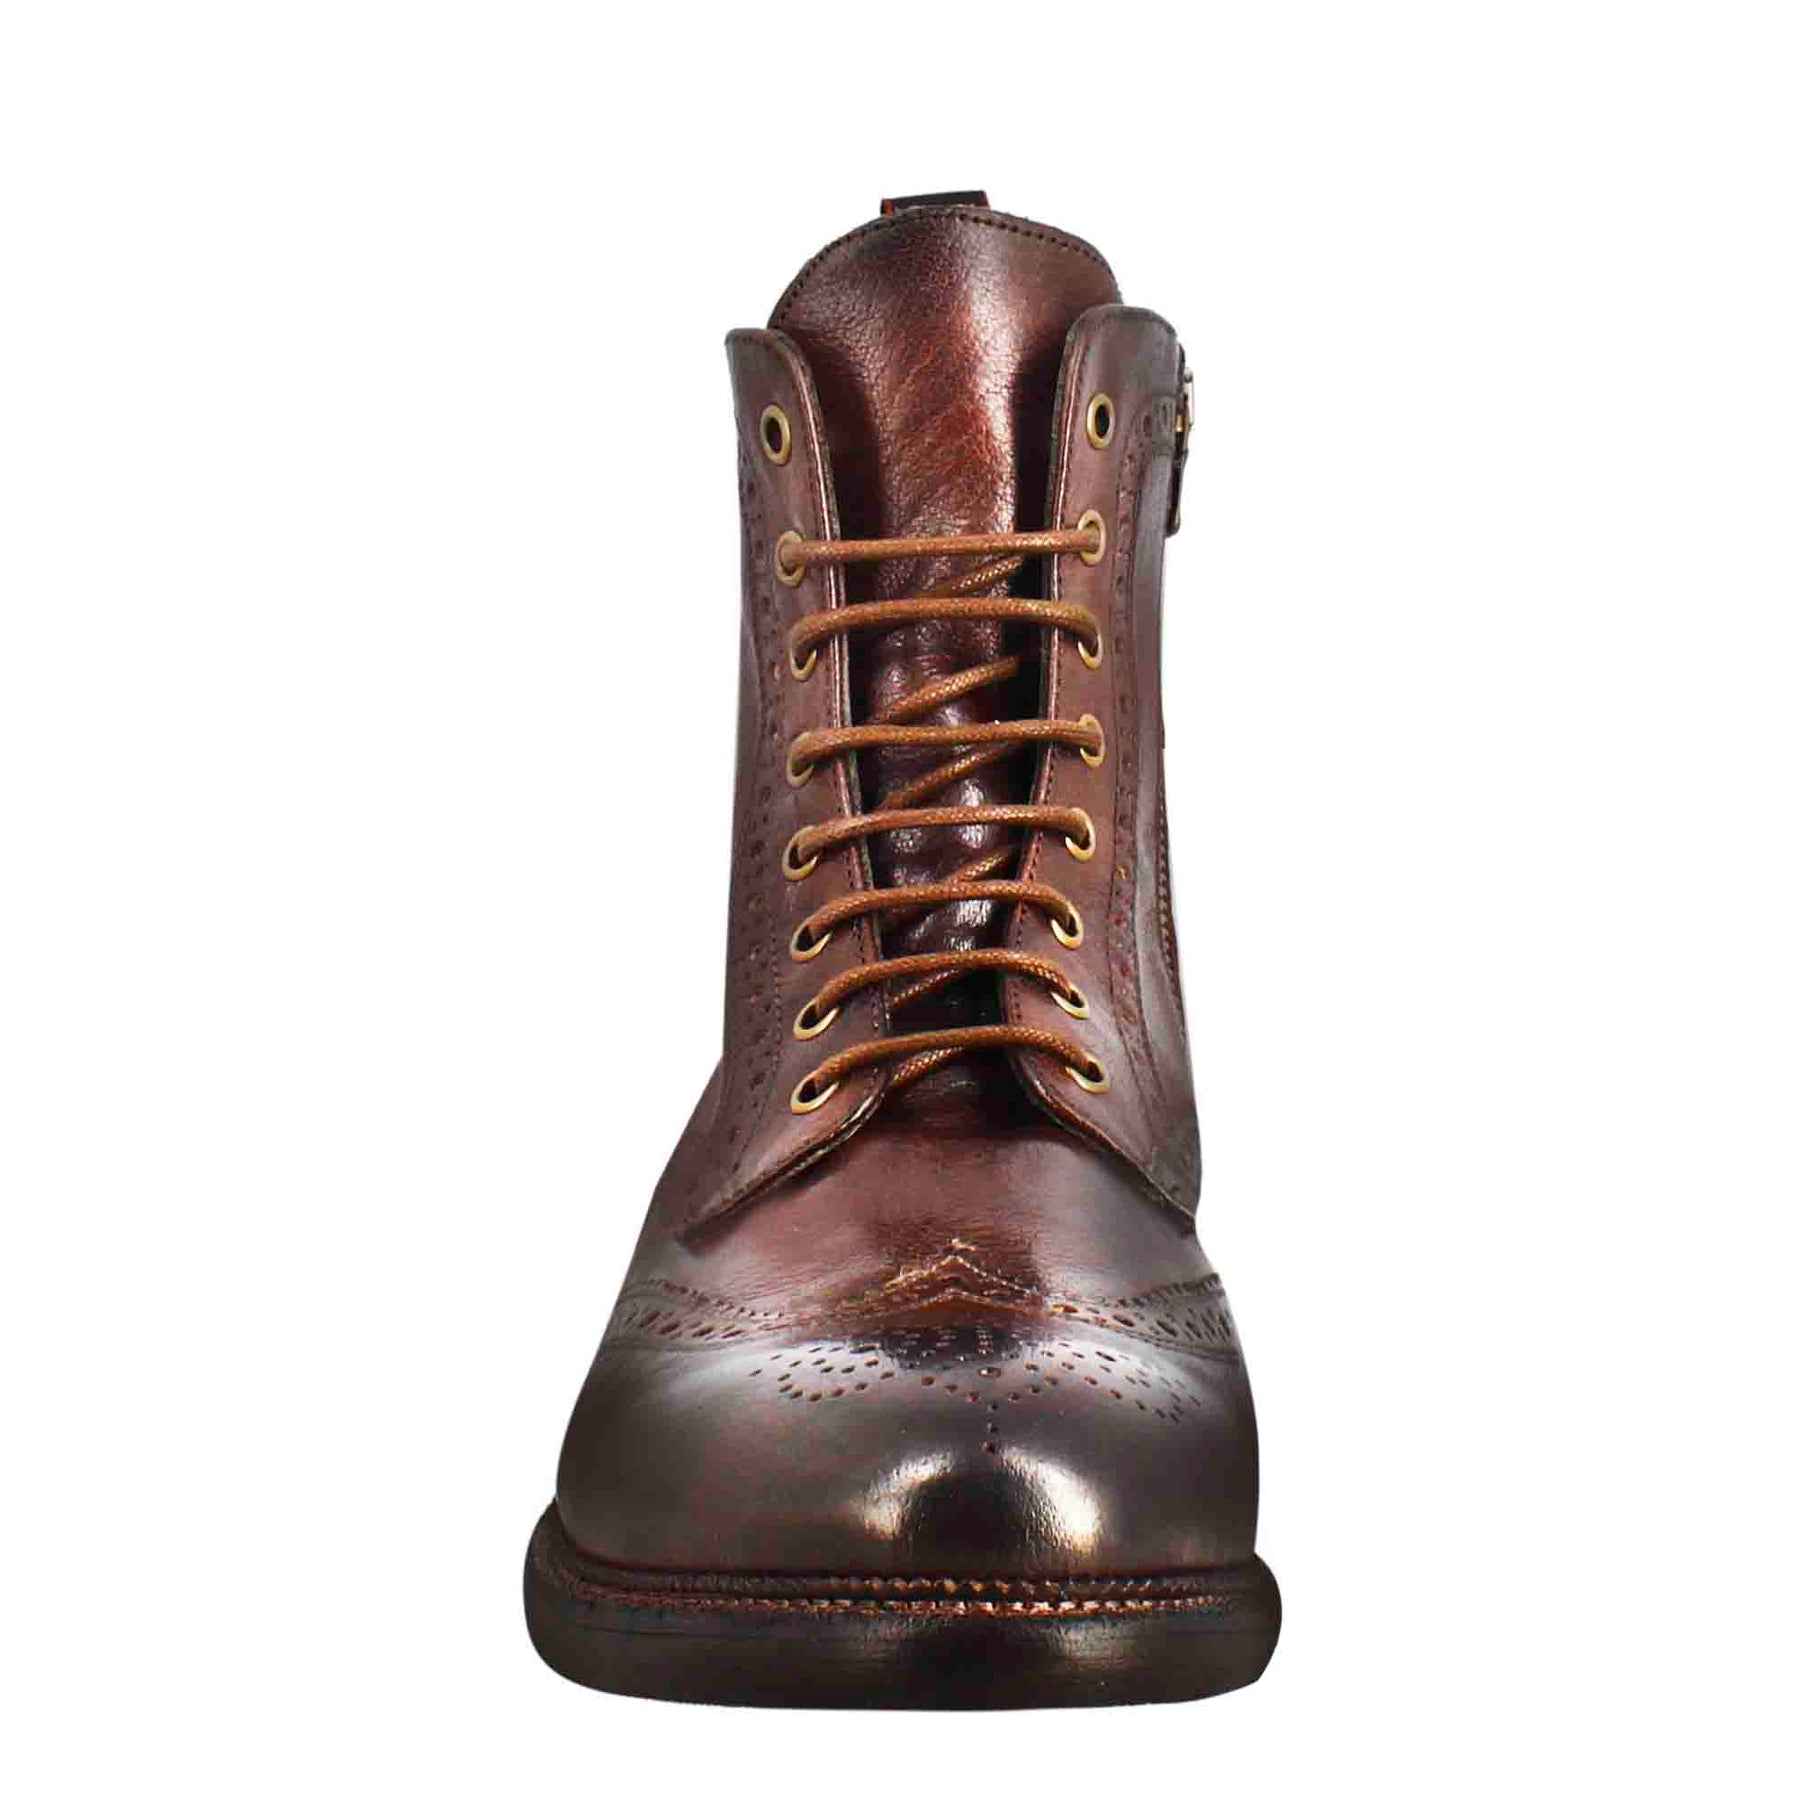 Candy amphibians for men in bronzed washed leather